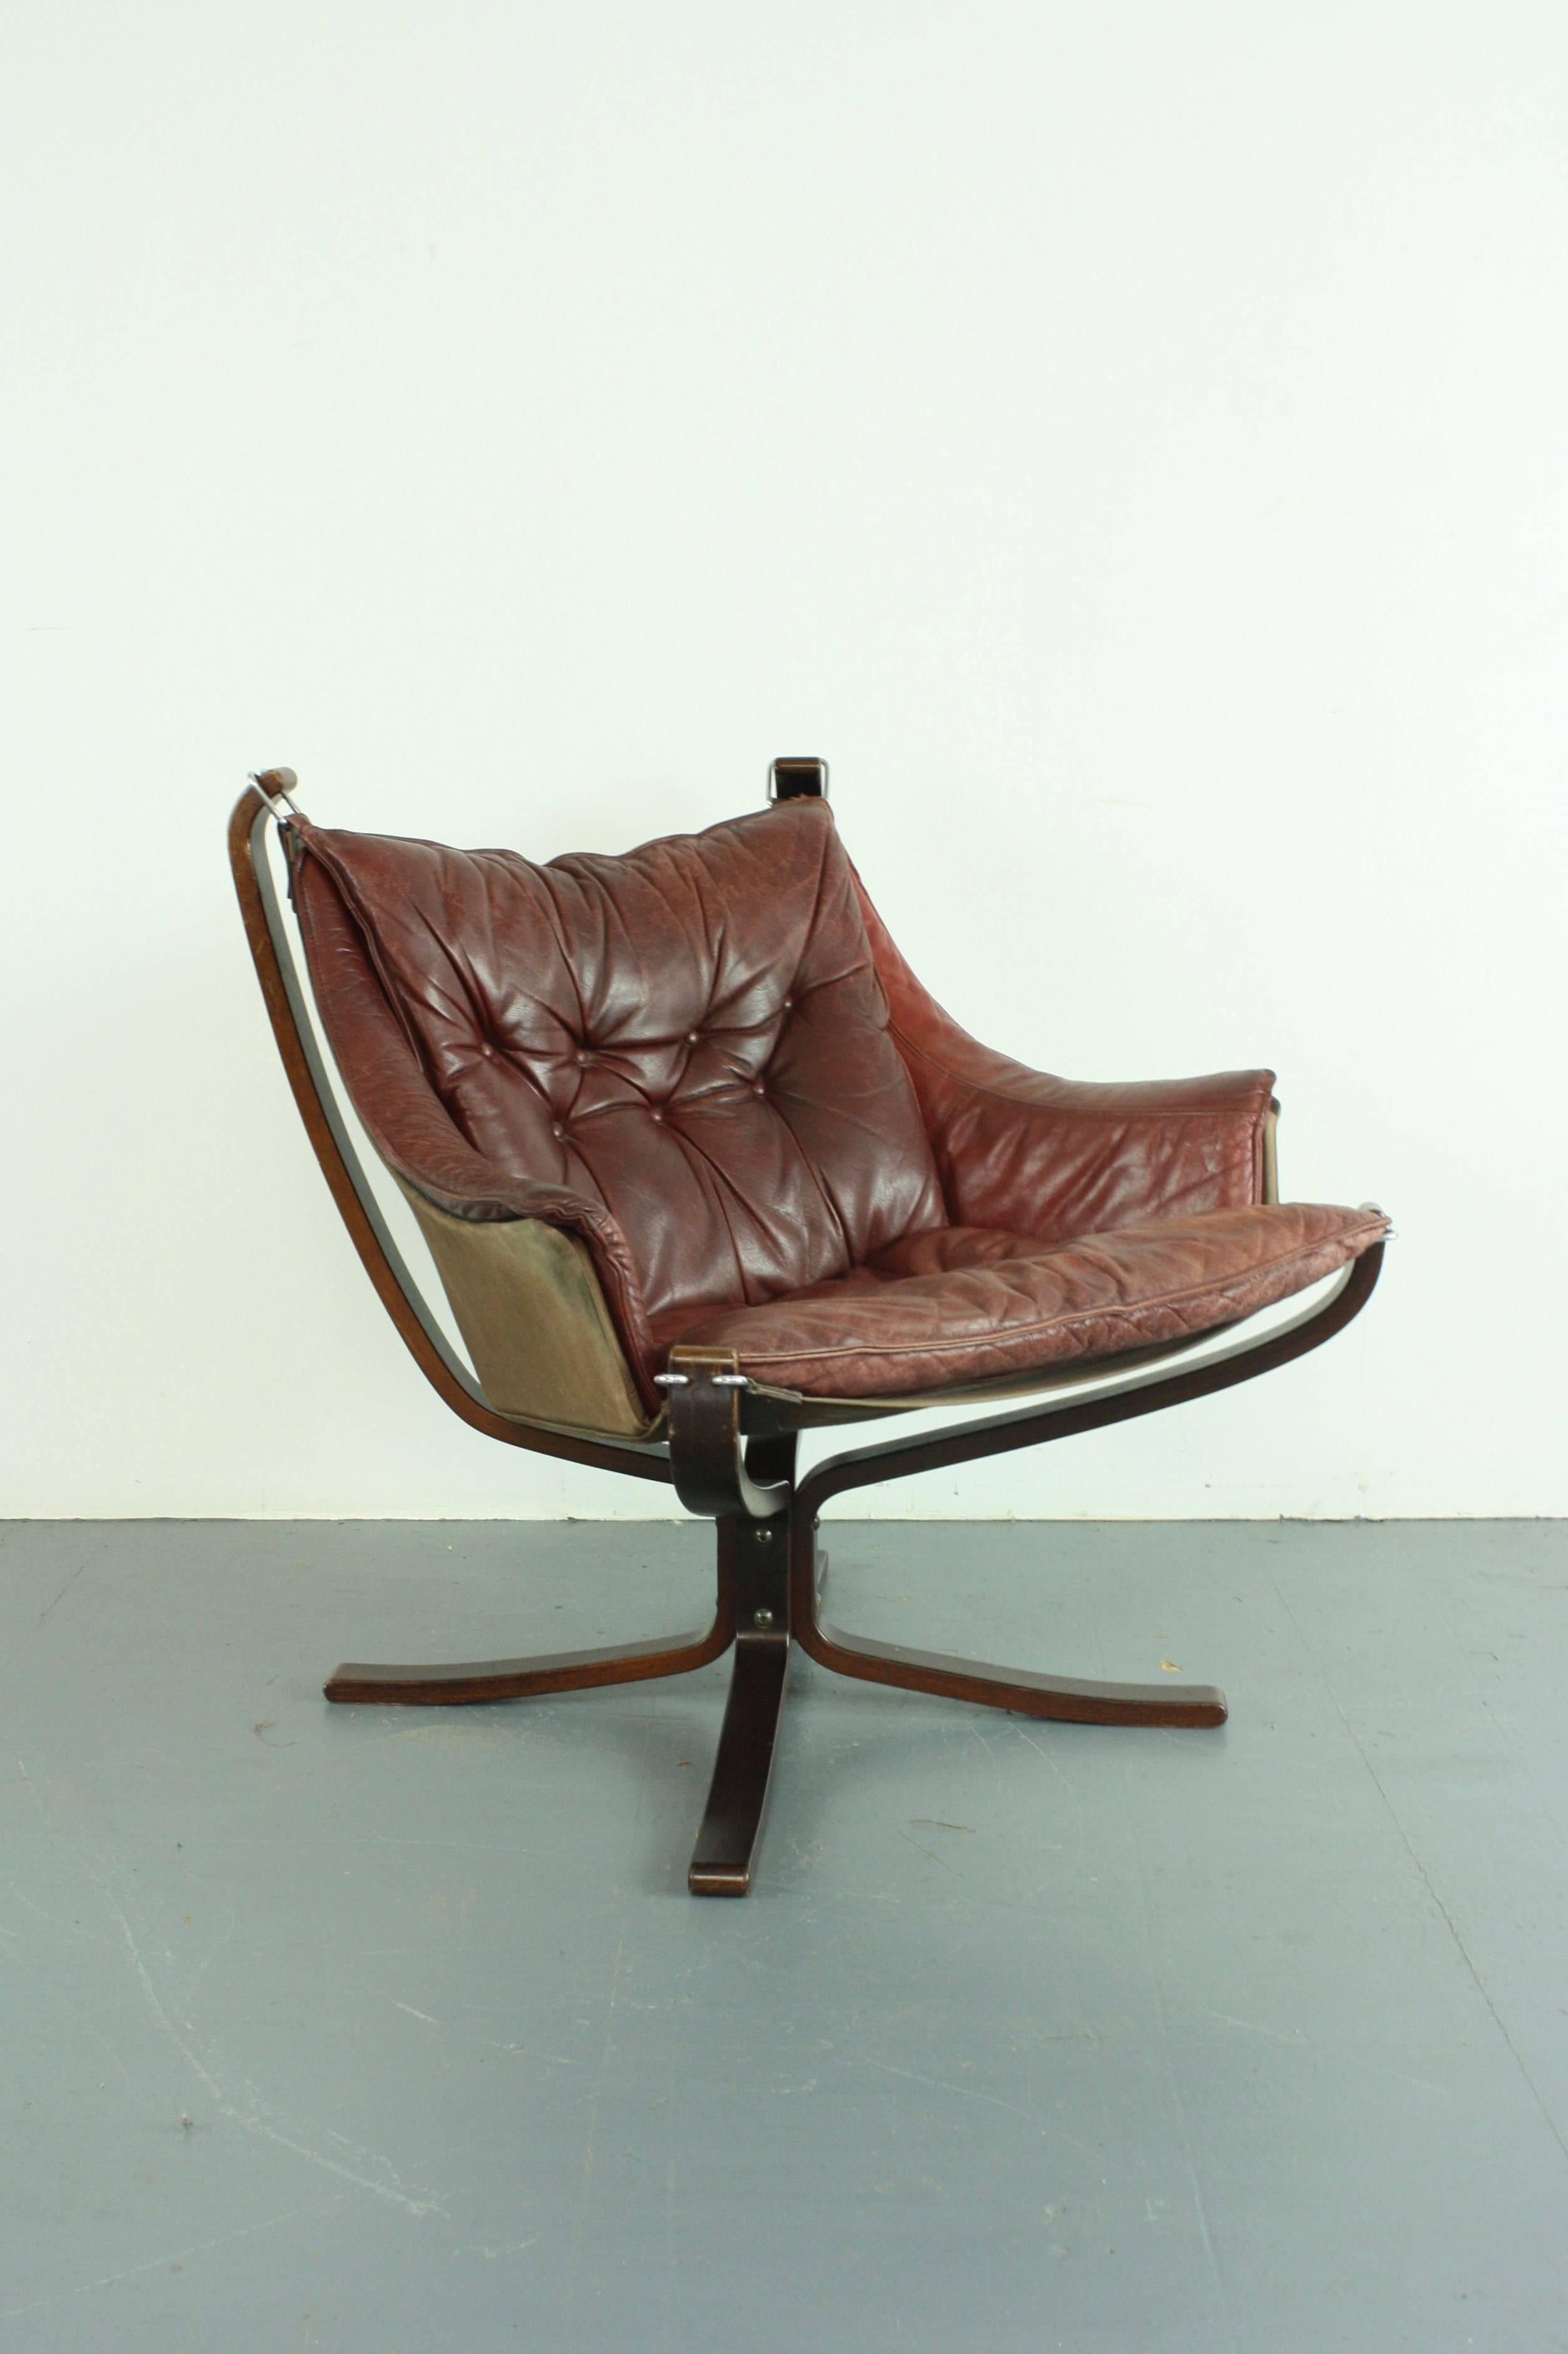 Rare low back winged chestnut brown leather Falcon chair designed by Sigurd Resell and made by Vatne Mobler of Norway in the 1960s-1970s.

The leather is in very good condition for its age with no rips or tears; there is some age-related wear but